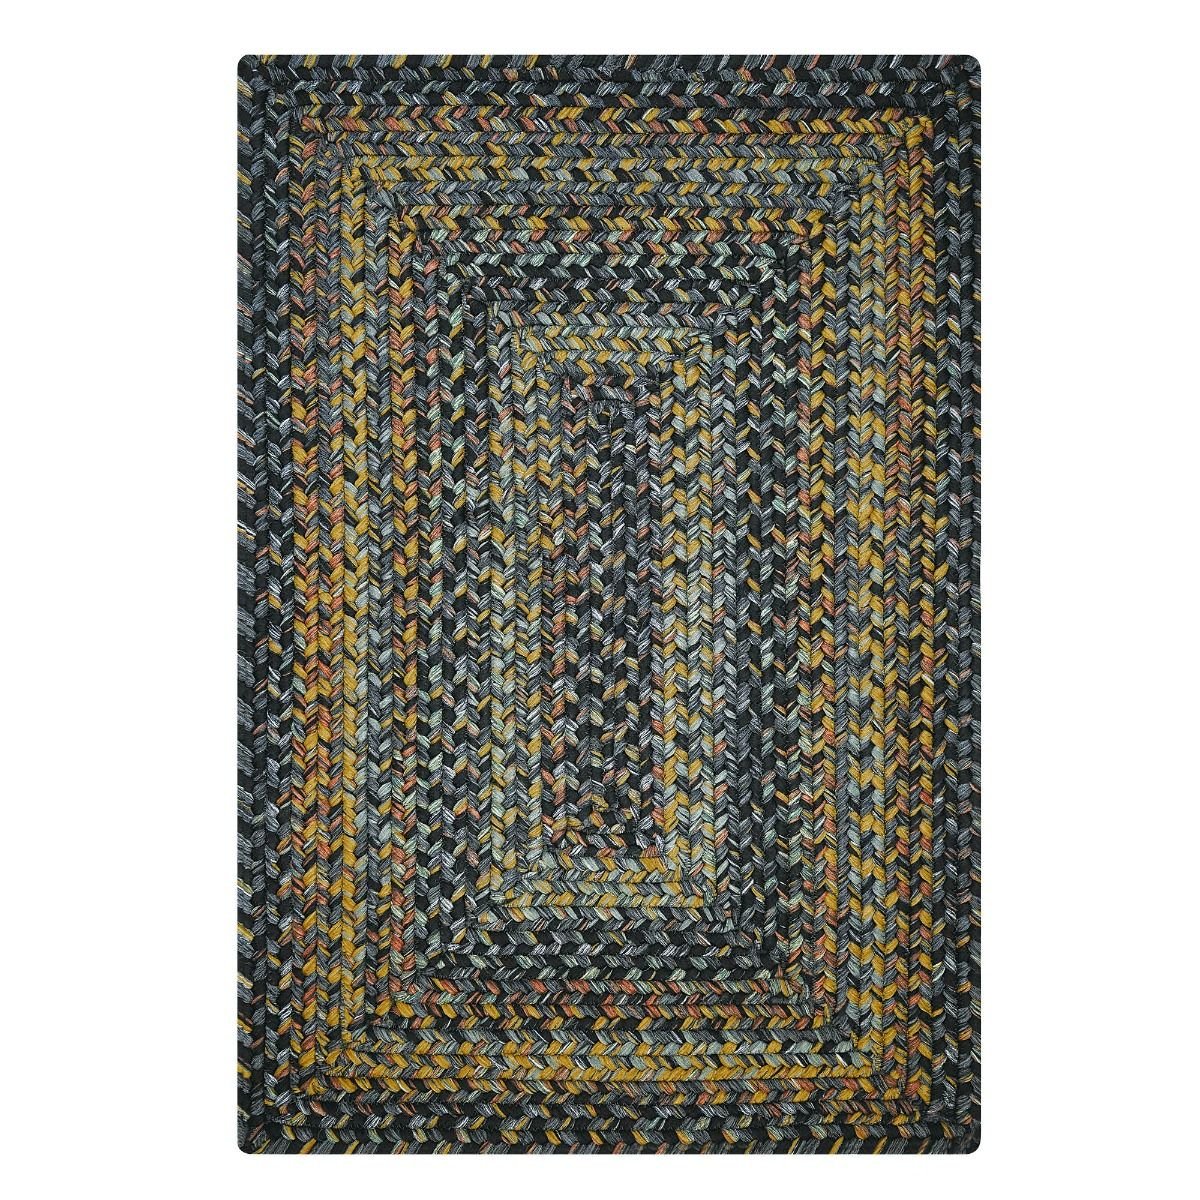 Black Forest Outdoor Braided Rectangular Rugs - Braided-Rugs.com